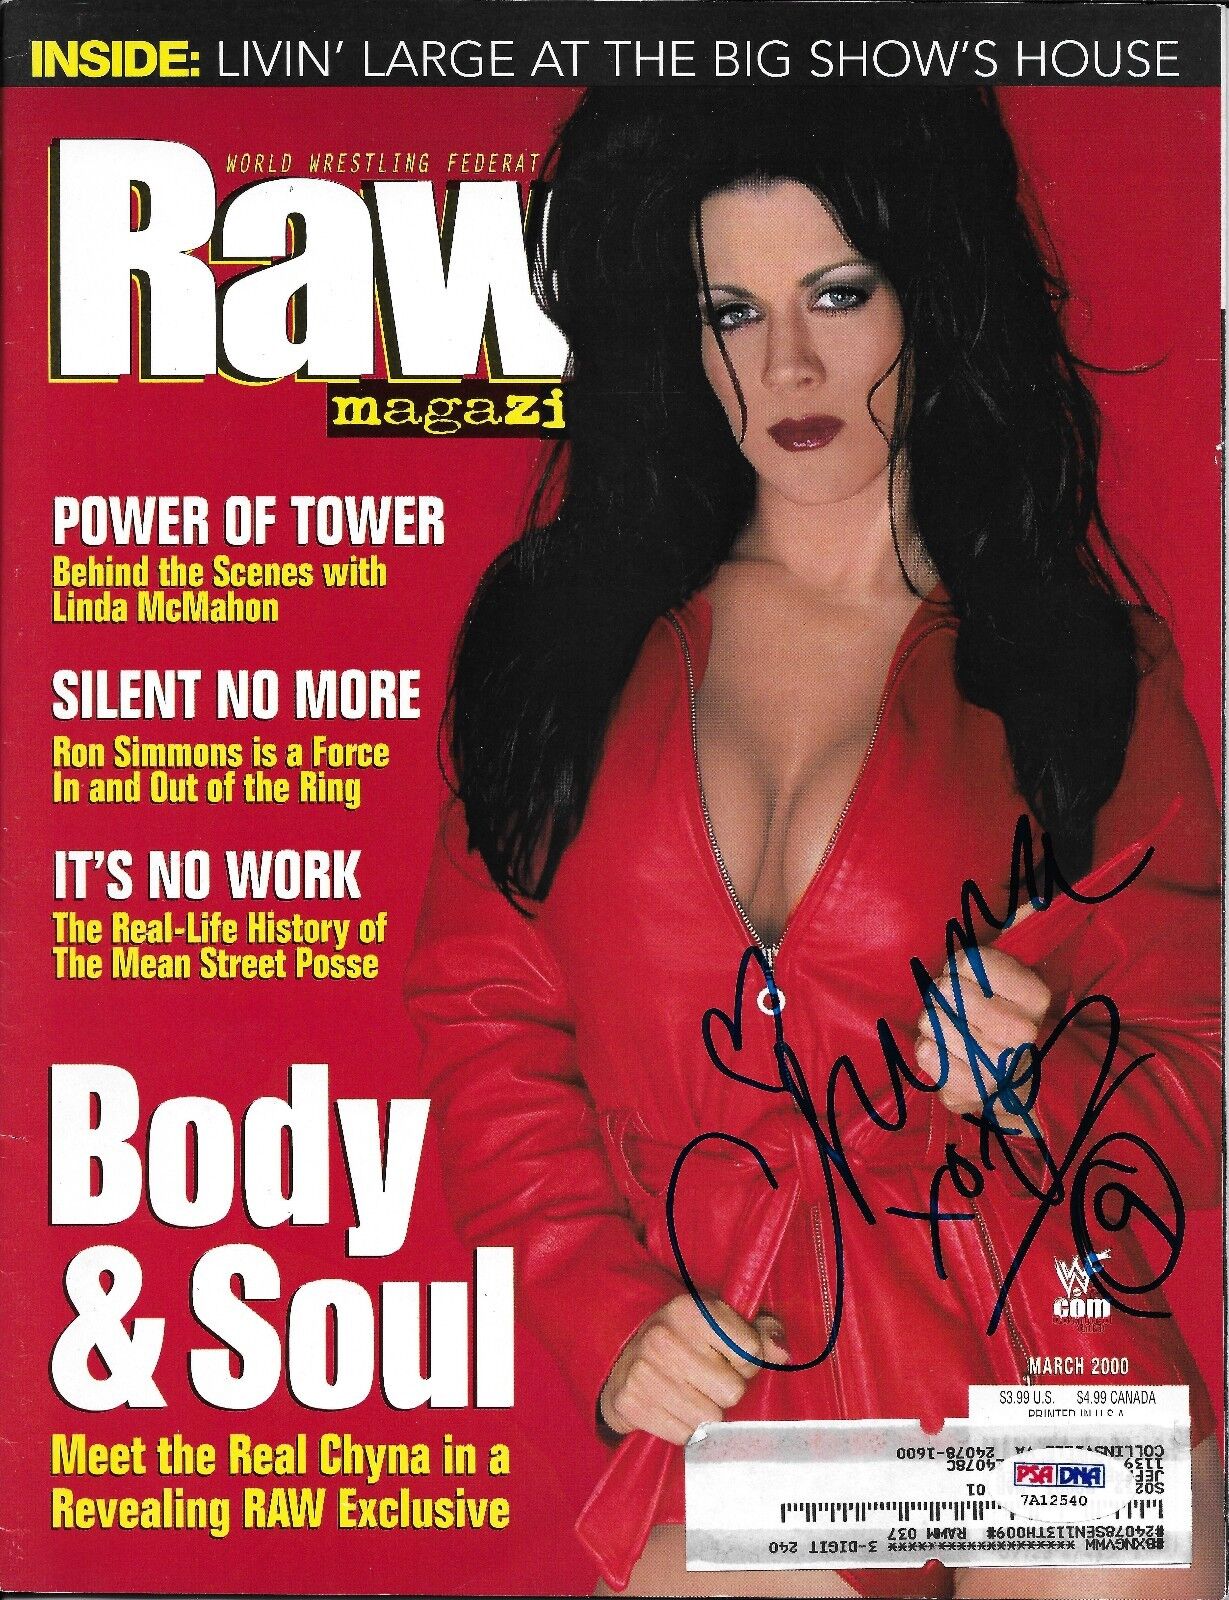 Chyna Signed WWE WWF March 2000 RAW Magazine PSA/DNA COA DX Diva Photo Poster painting Autograph